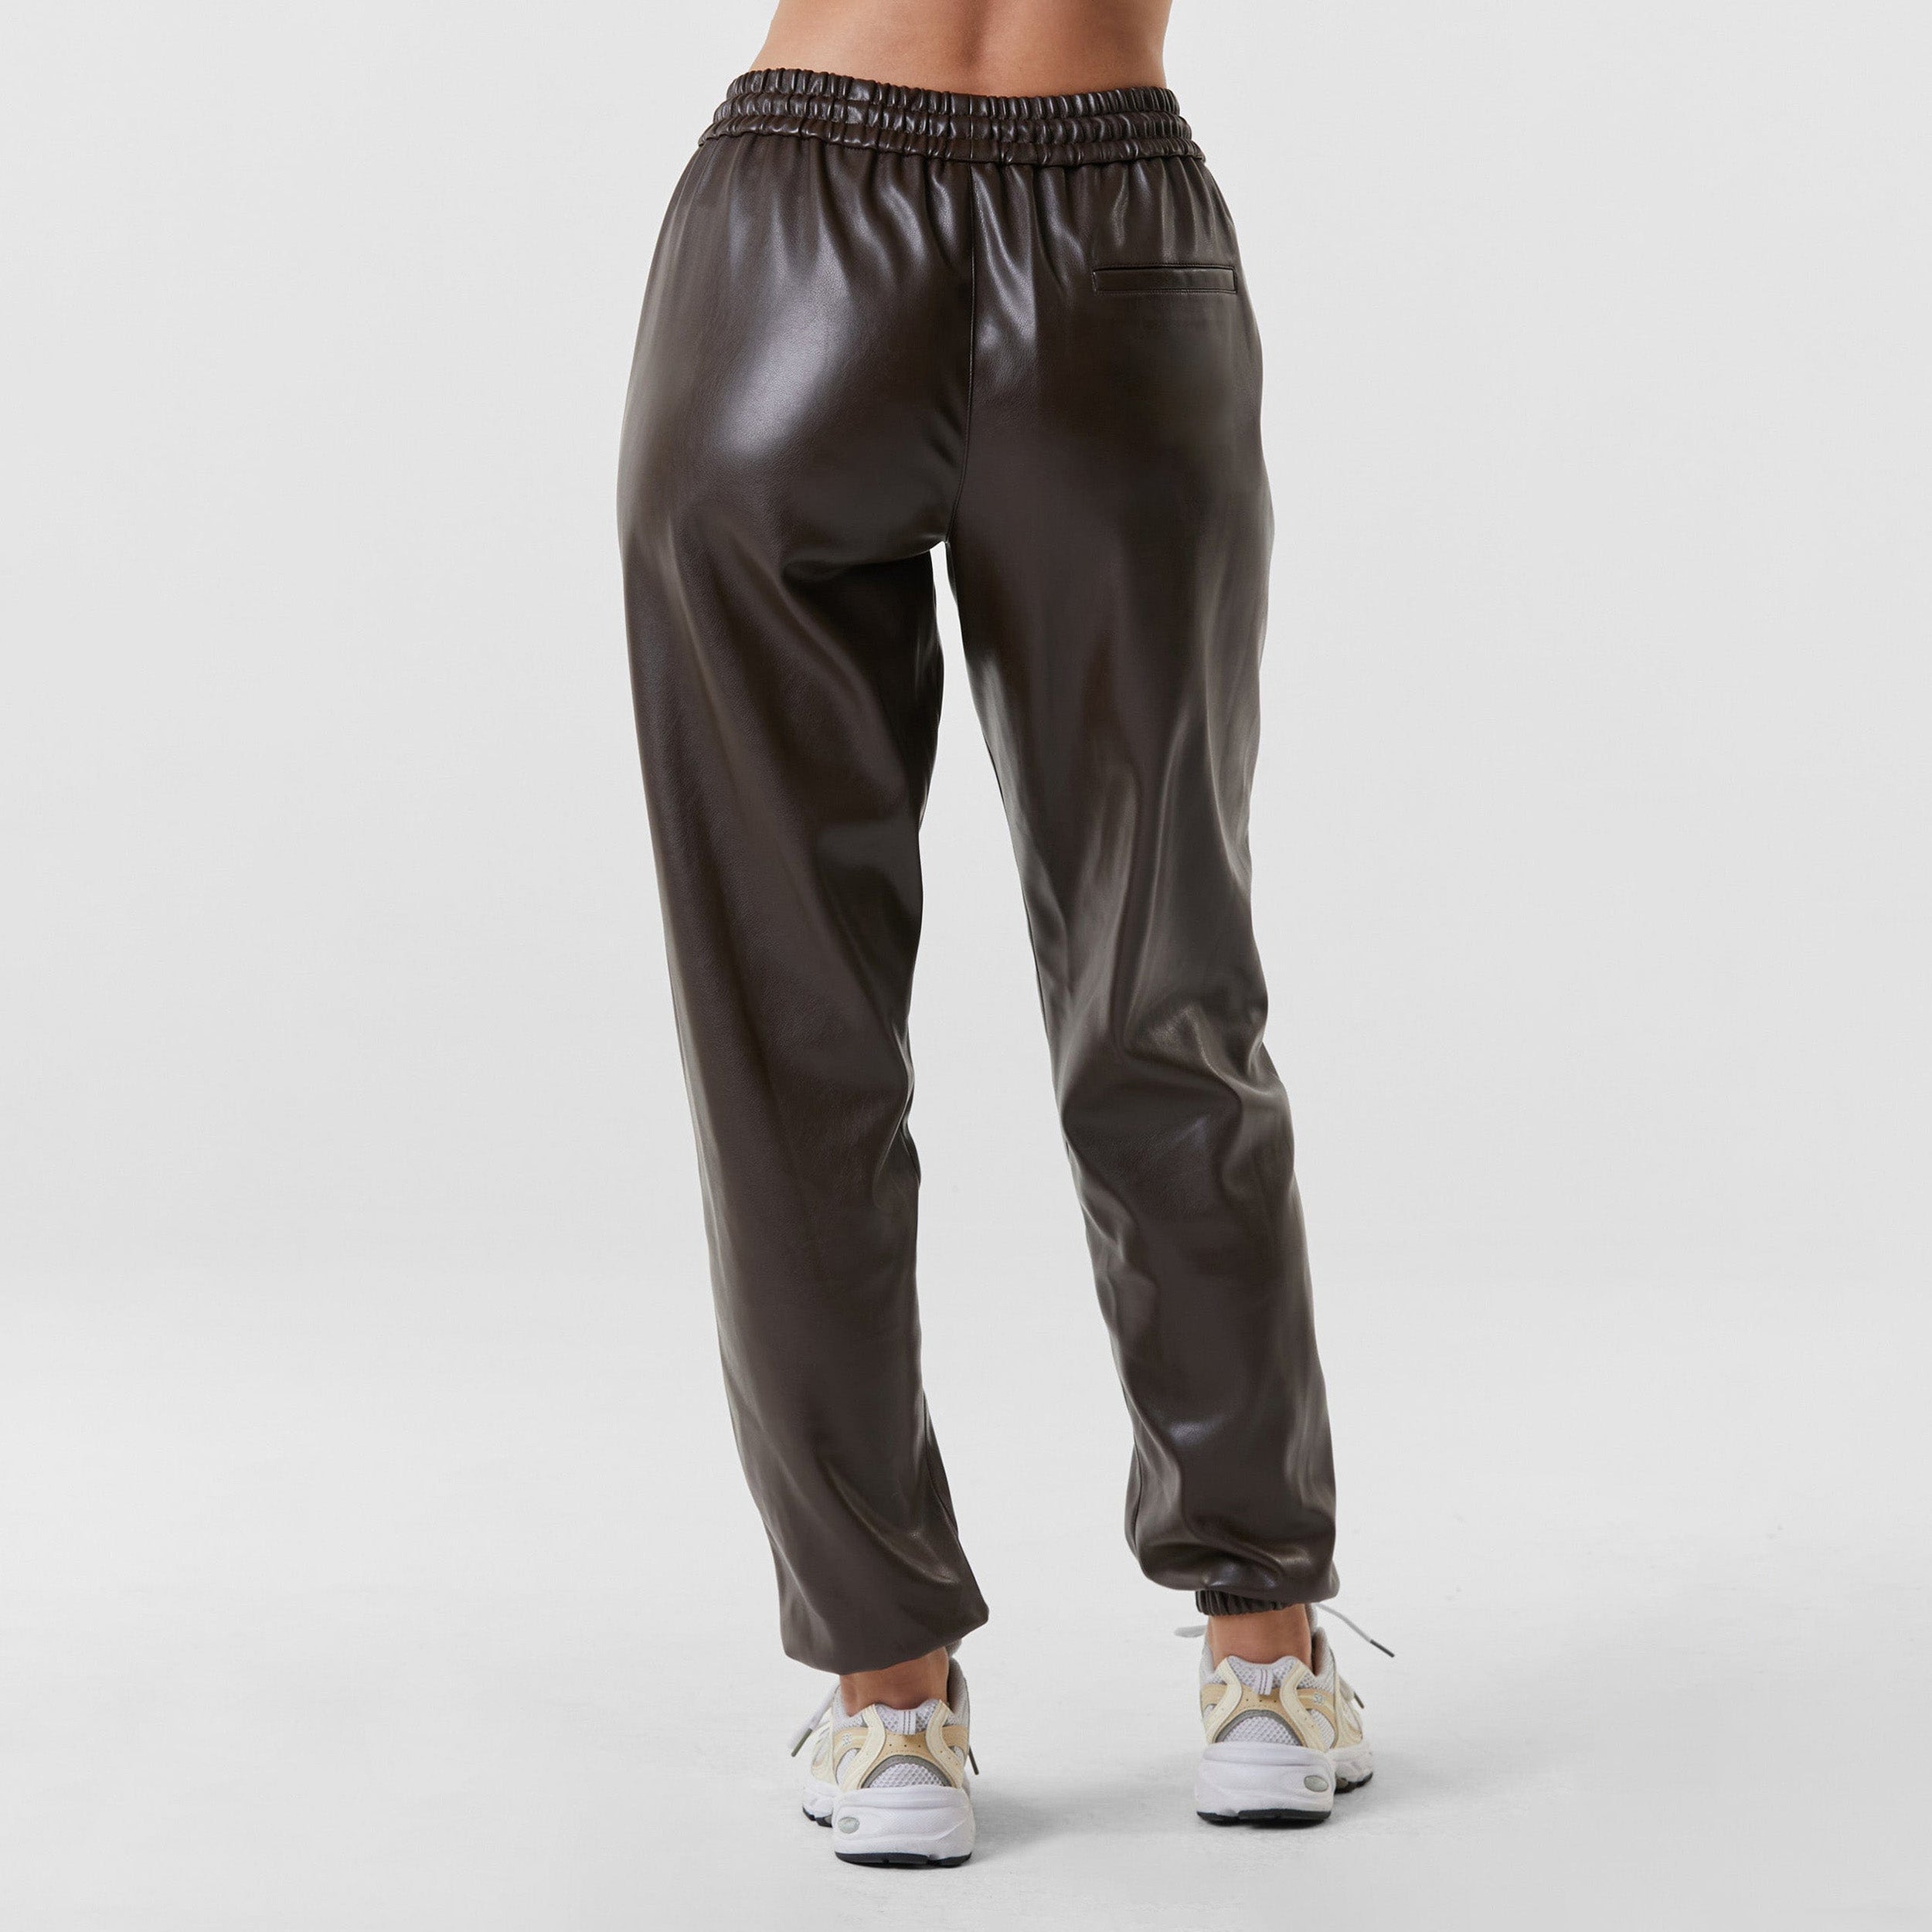 Rear view of woman wearing dark brown high rise faux leather jogger with drawstring waistband and cinched ankles with suede lining.